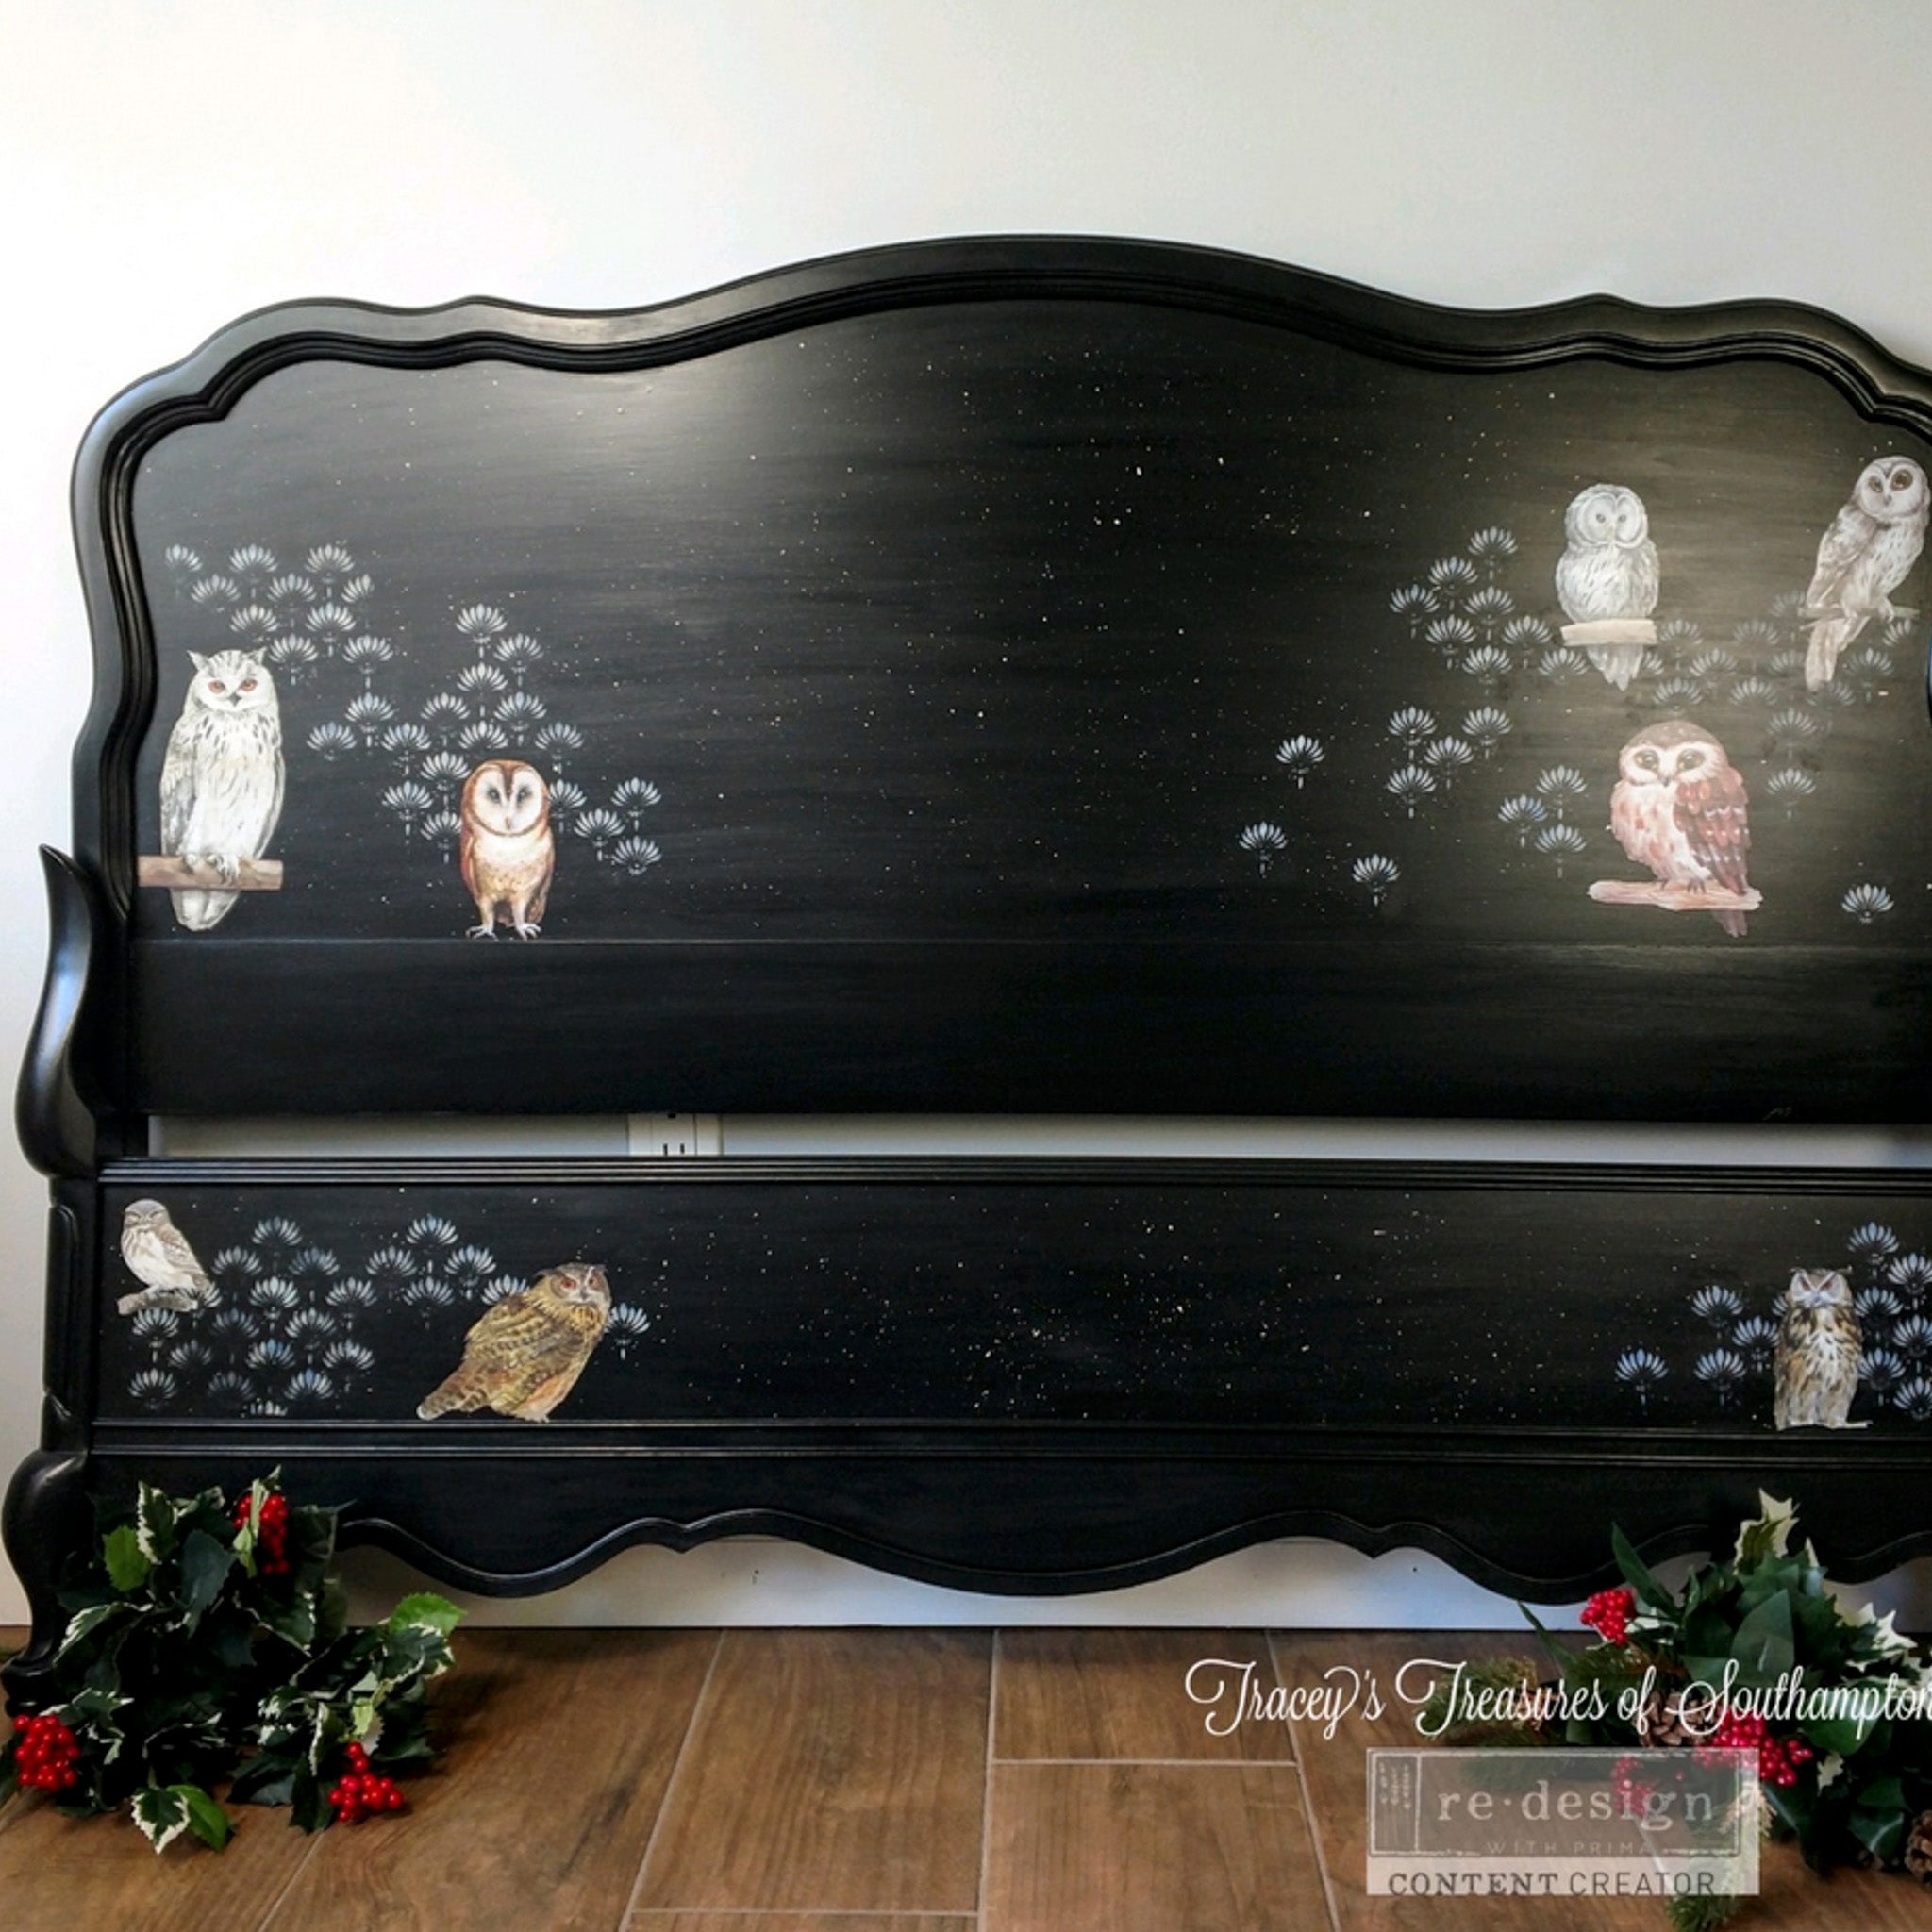 A vintage headboard and footboard refurbished by Tracey's Treasures of Southampton are painted black and features ReDesign with Prima's Owl small transfer on them.